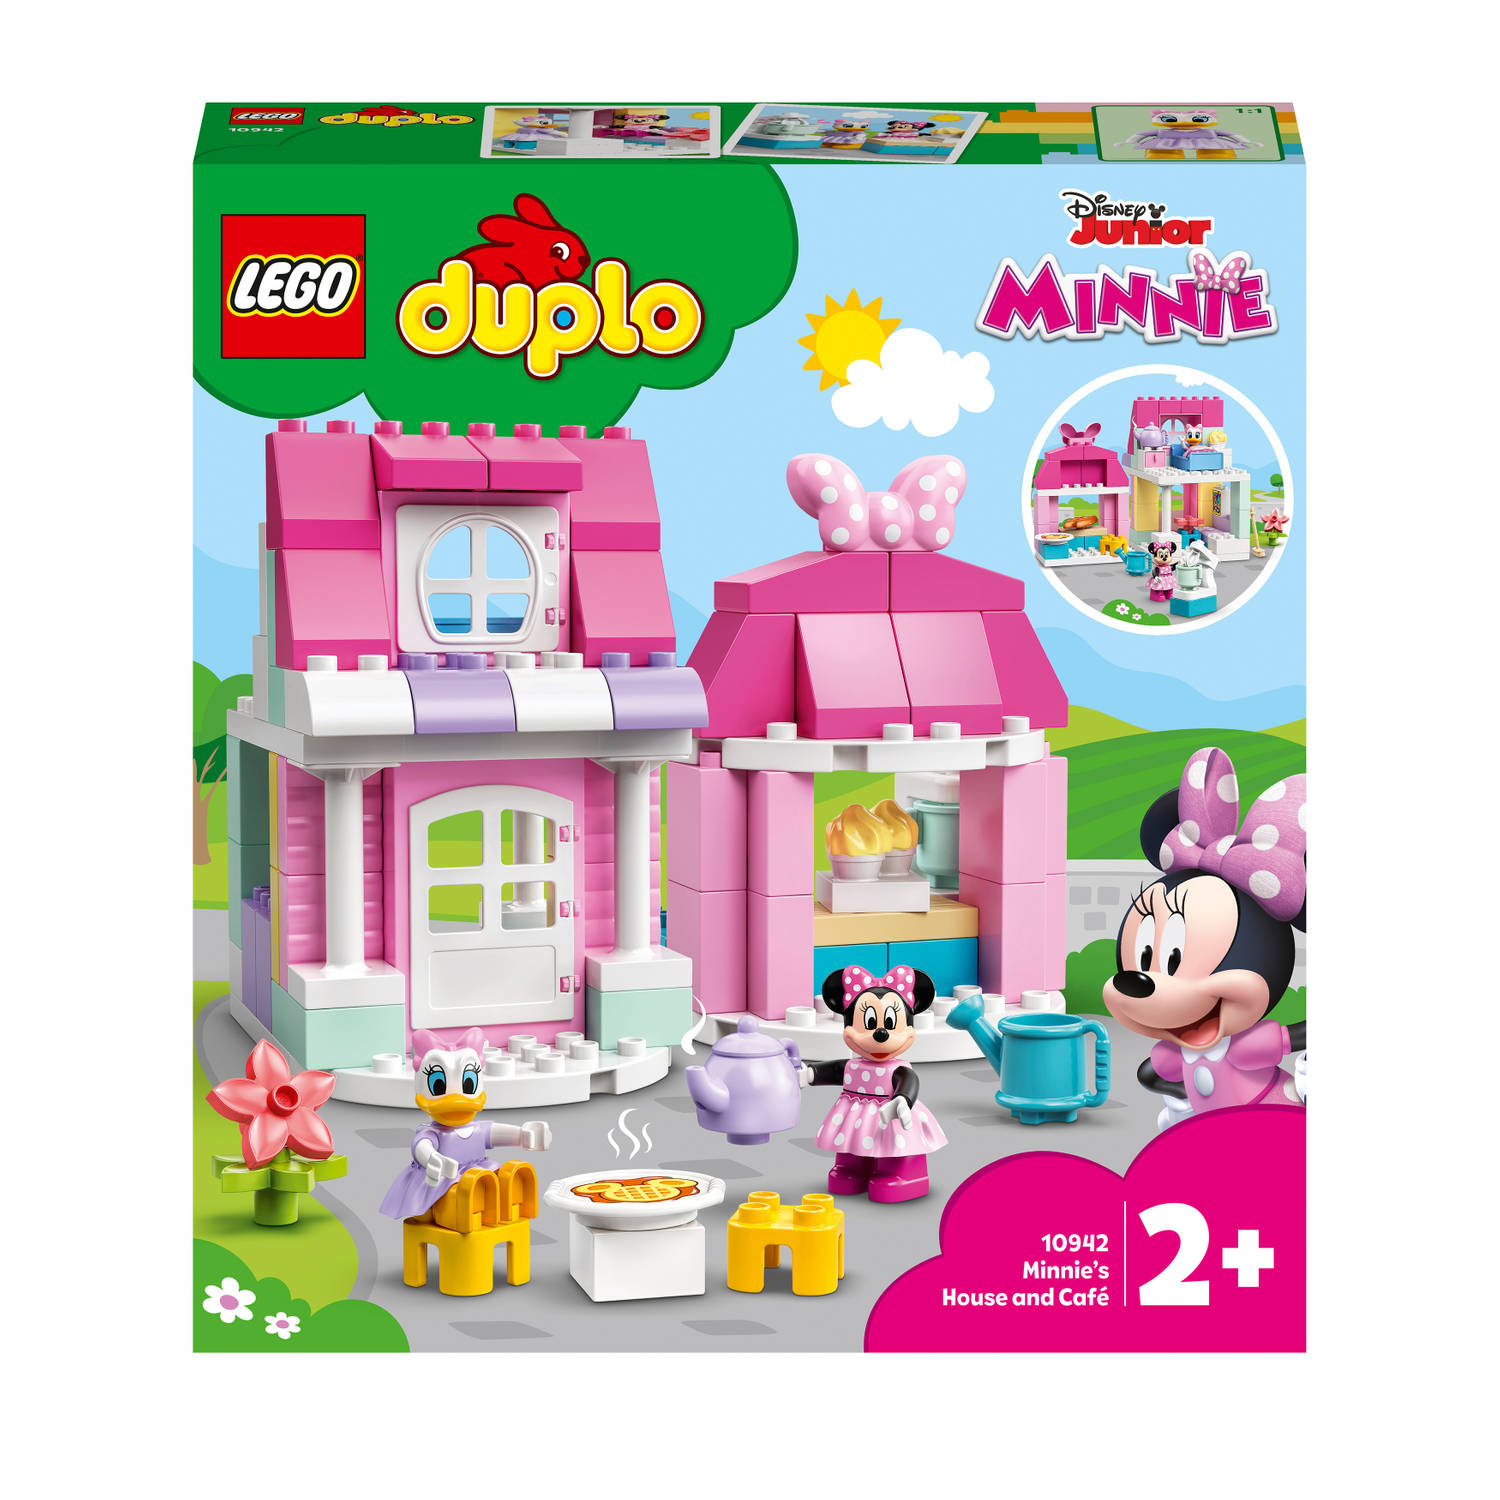 LEGO DUPLO 10942 Minnies House and Cafe